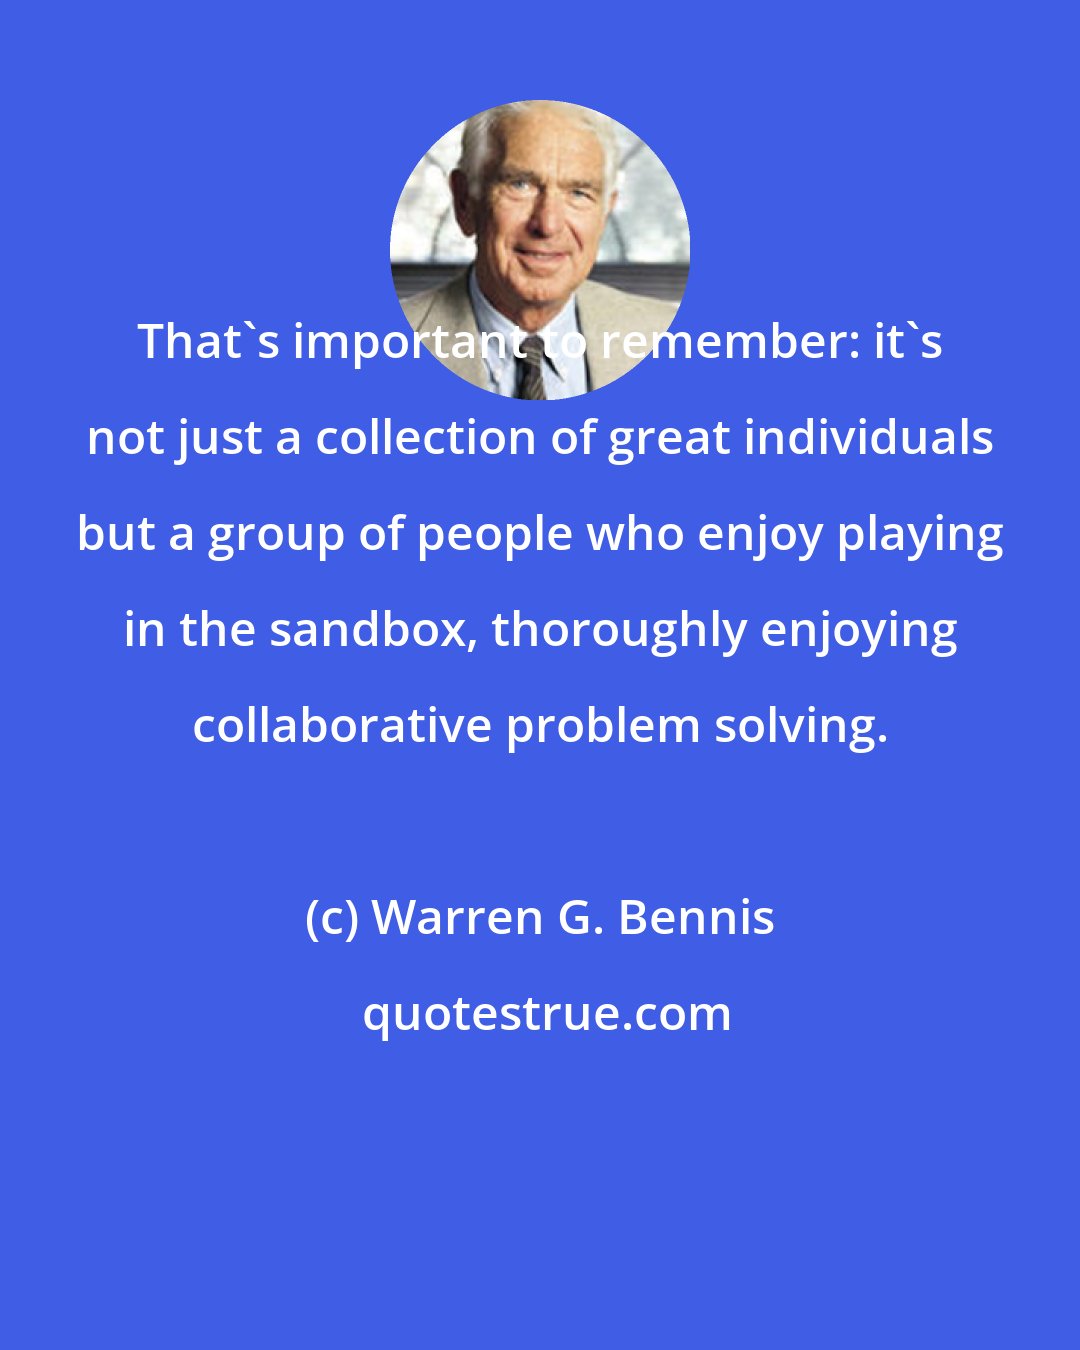 Warren G. Bennis: That's important to remember: it's not just a collection of great individuals but a group of people who enjoy playing in the sandbox, thoroughly enjoying collaborative problem solving.